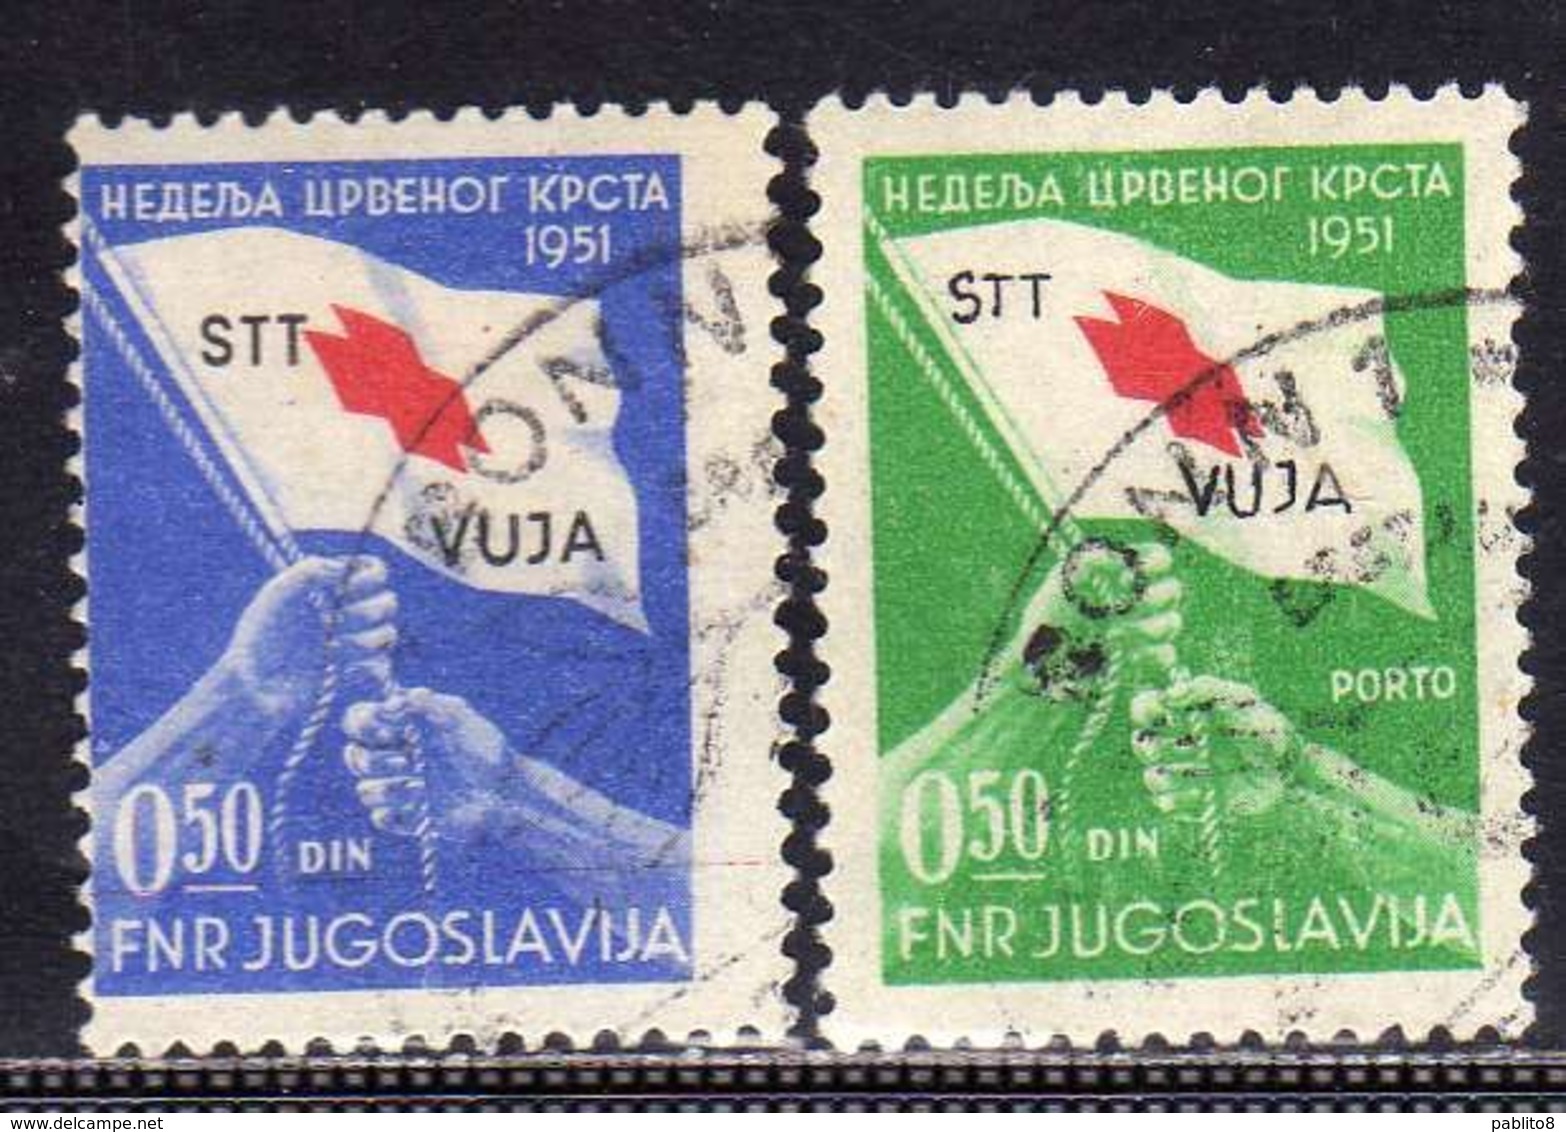 TRIESTE B 1951 CROCE ROSSA RED CROSS CROIX ROUGE SERIE COMPLETA COMPLETE SET USATA USED OBLITERE' - Used